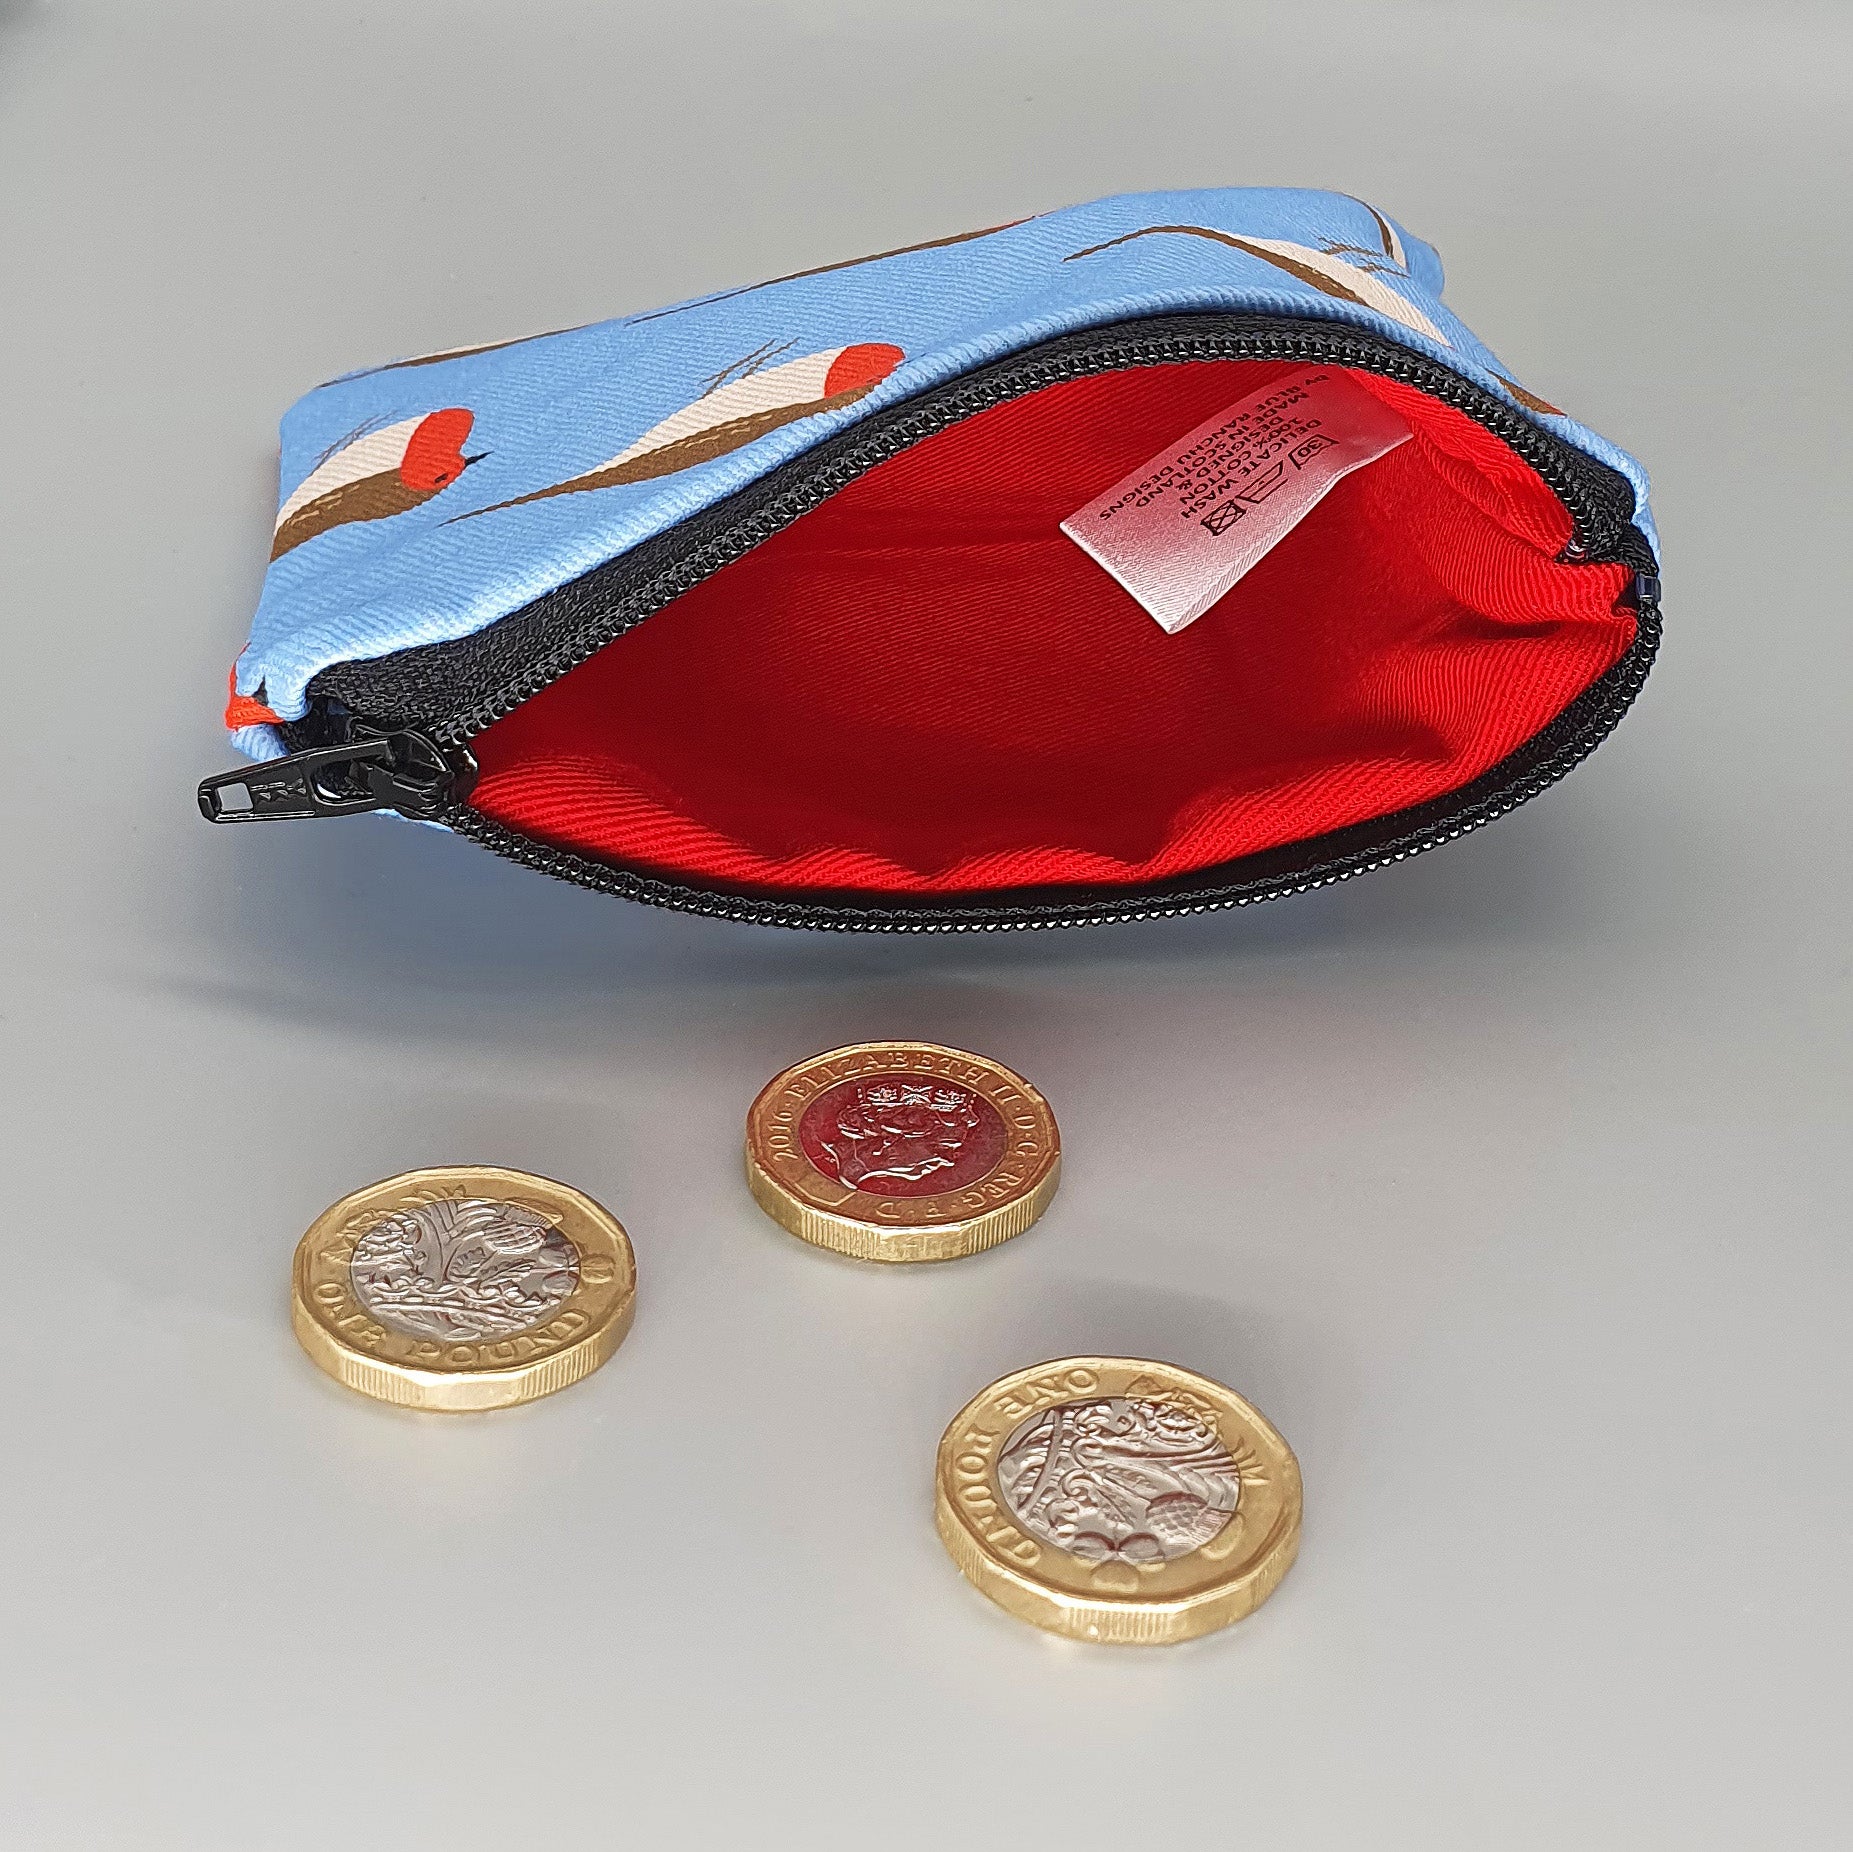 Robin purse with red interior